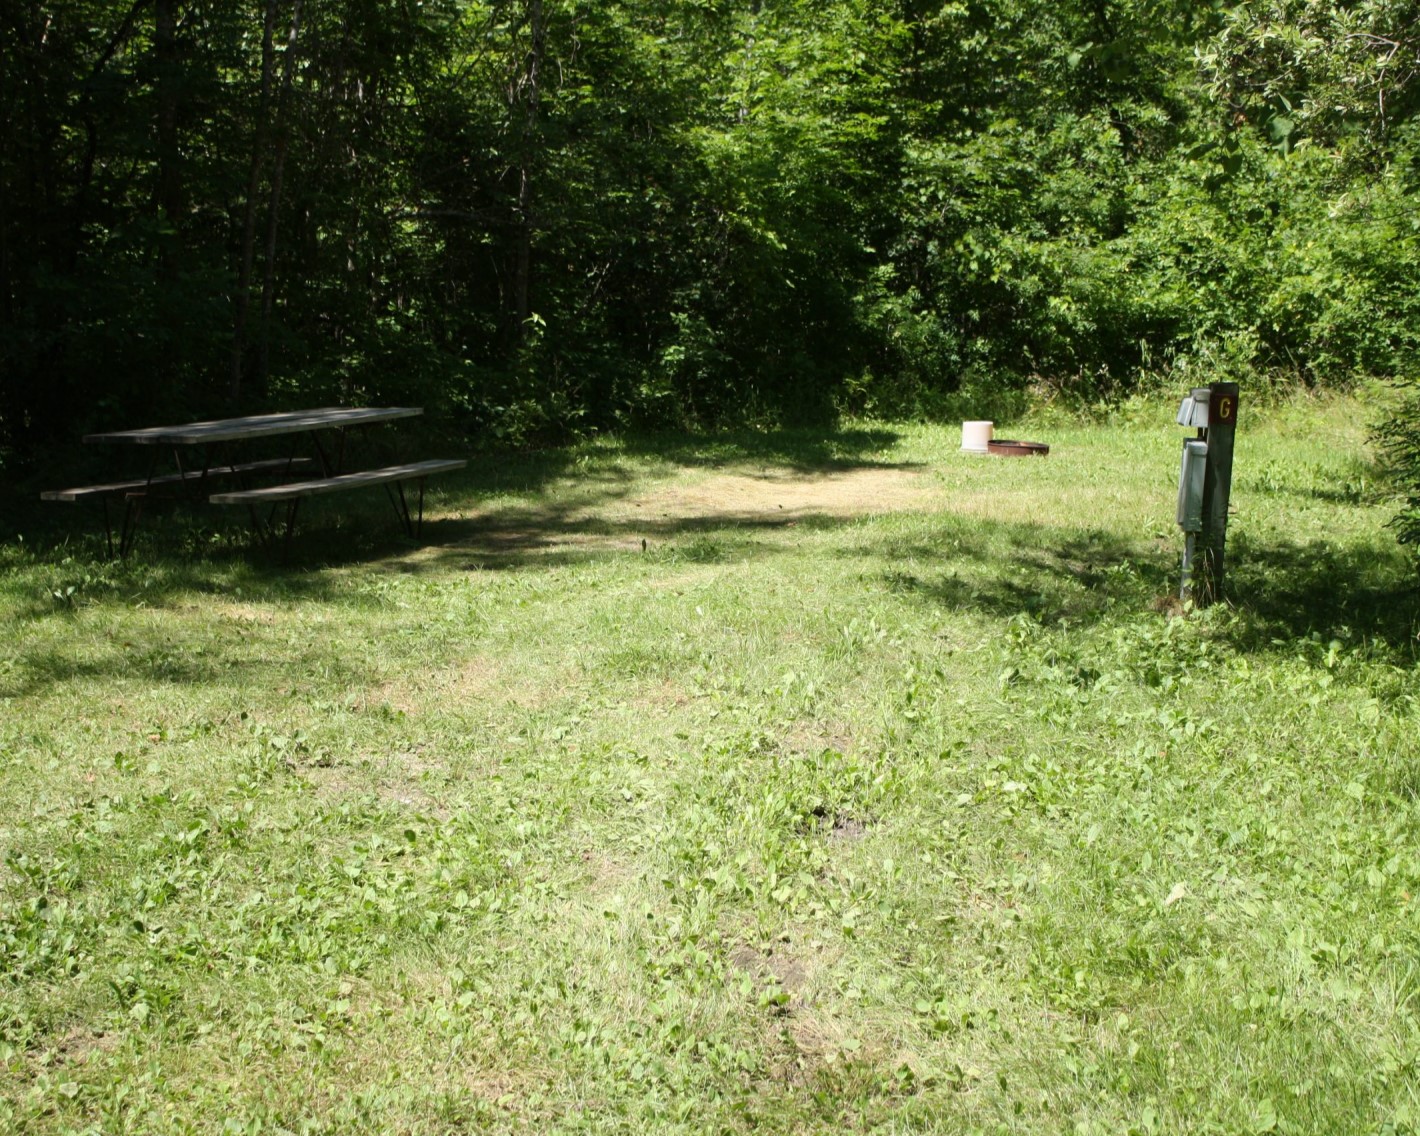 Picture of an grass lot with a picnic table showing where an RV would go.